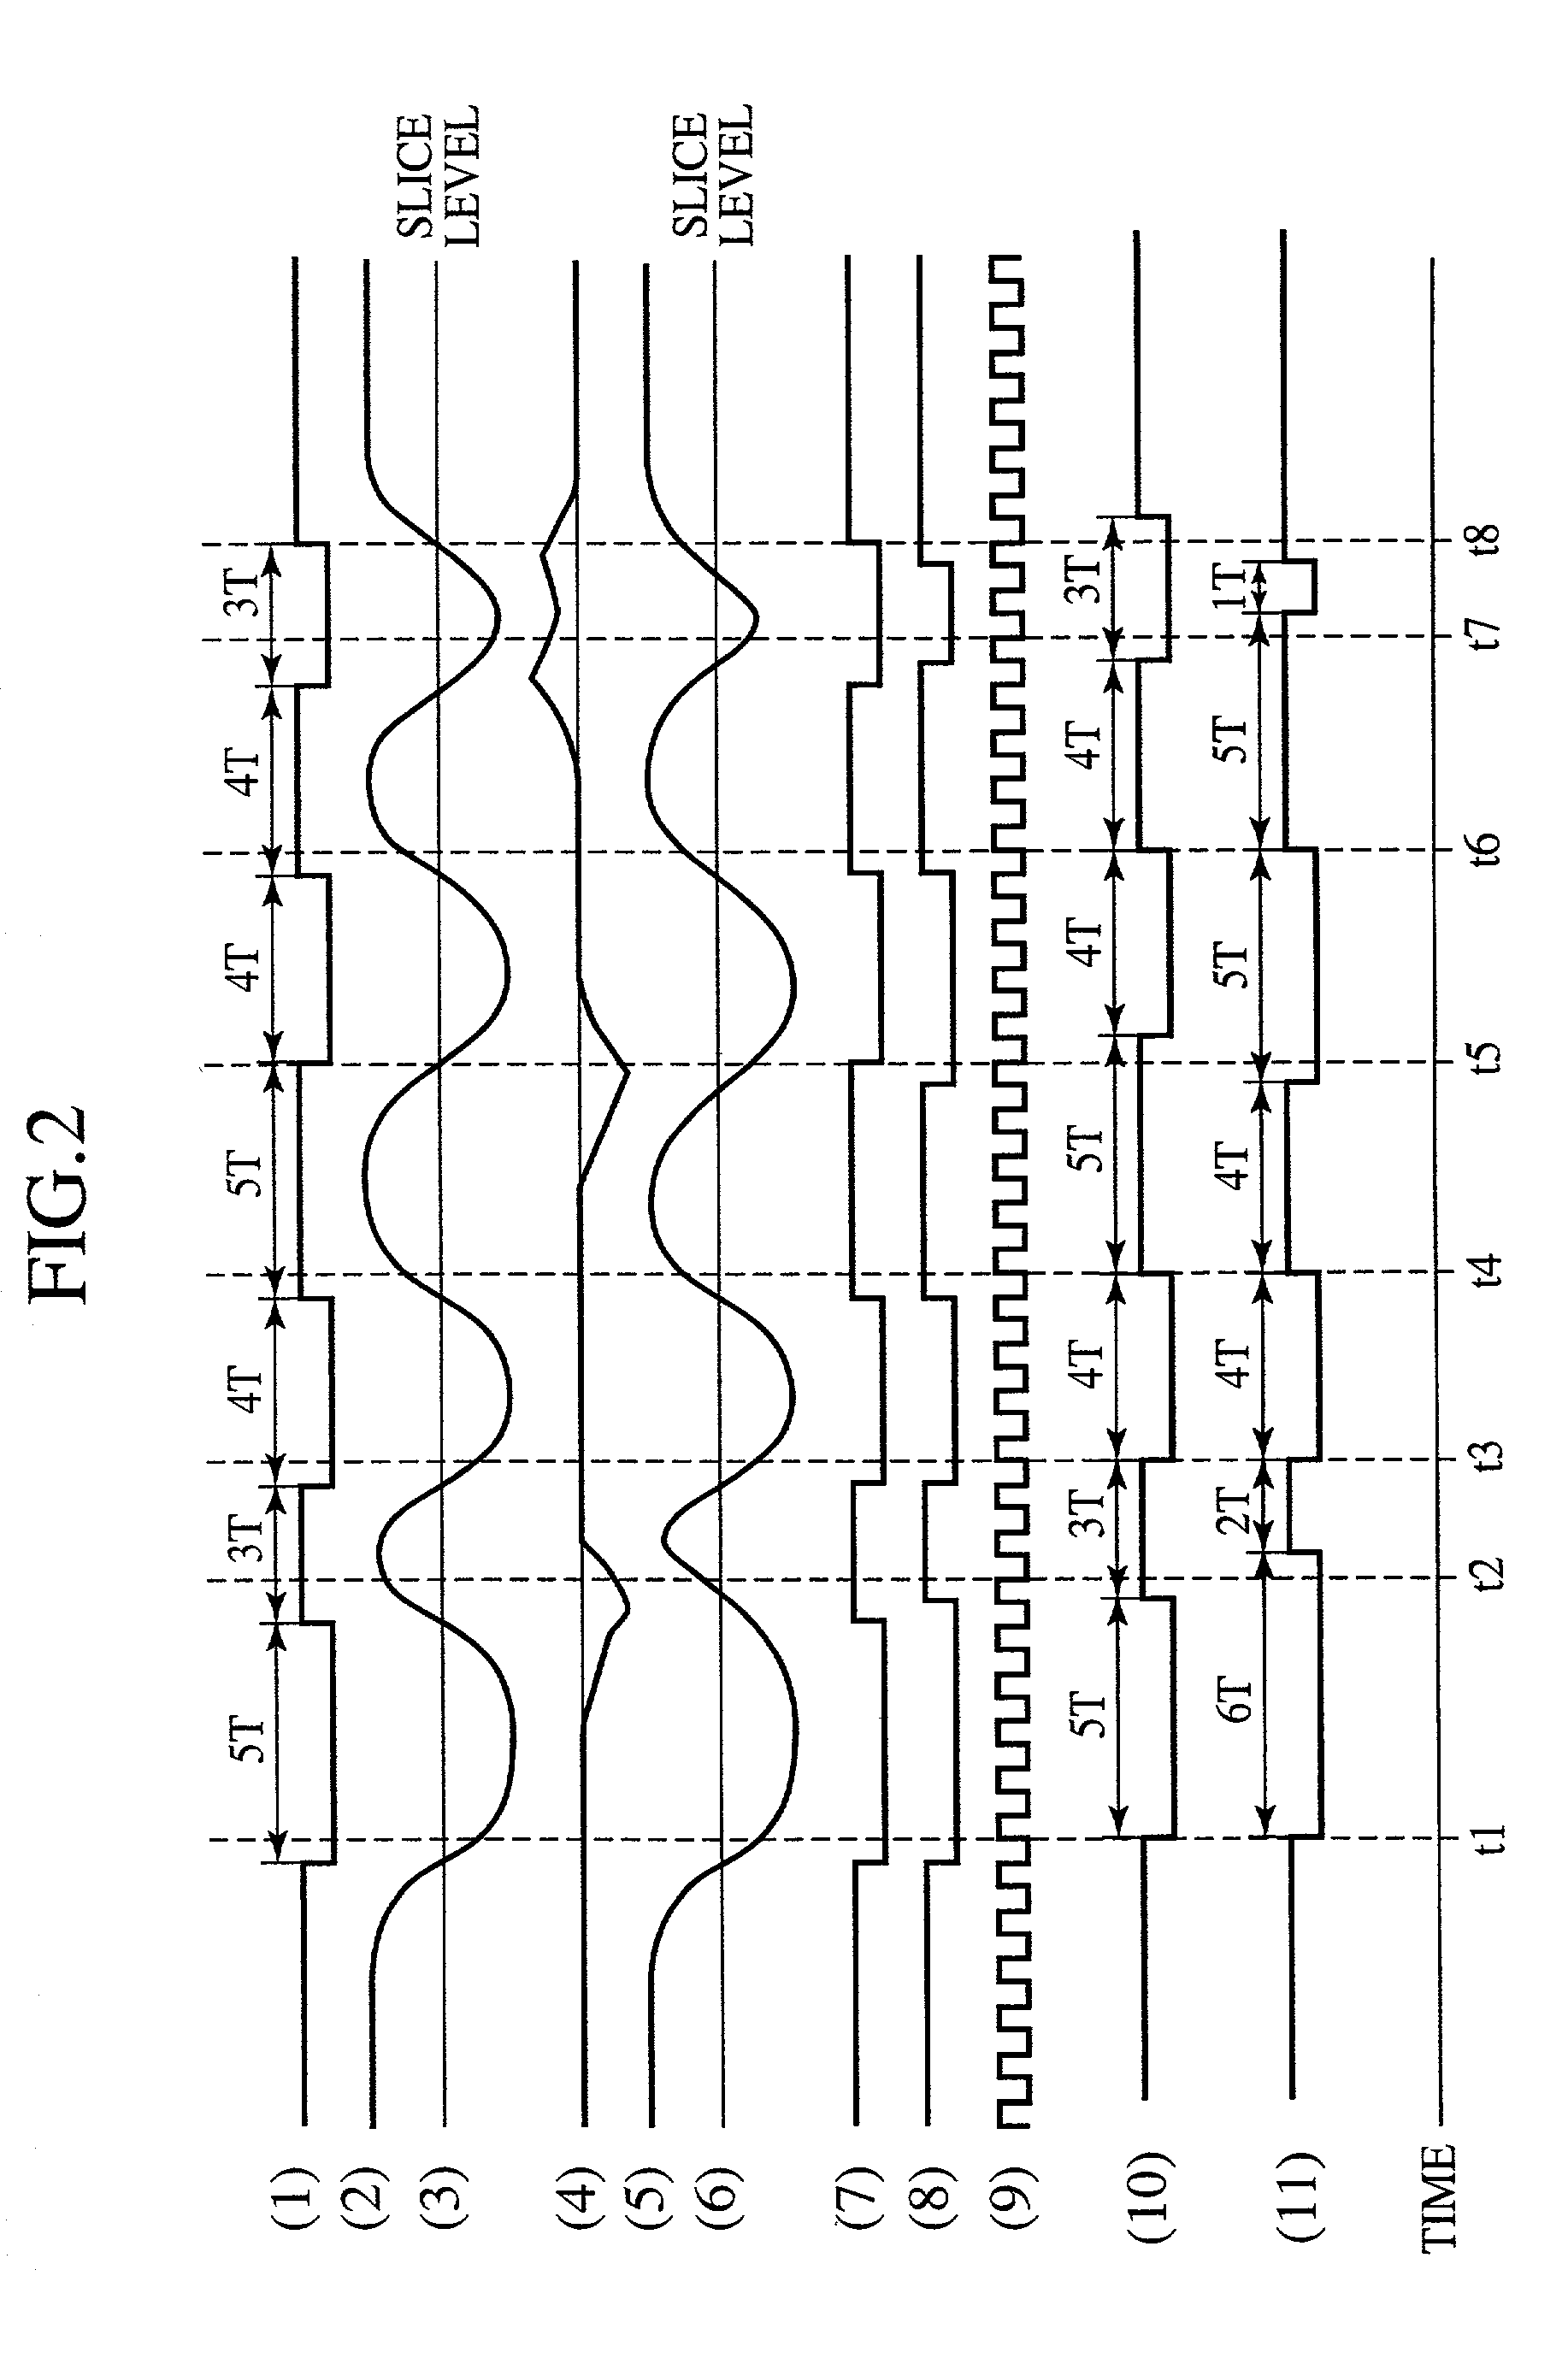 Read channel circuit and method for decoding using reduced-complexity error correction